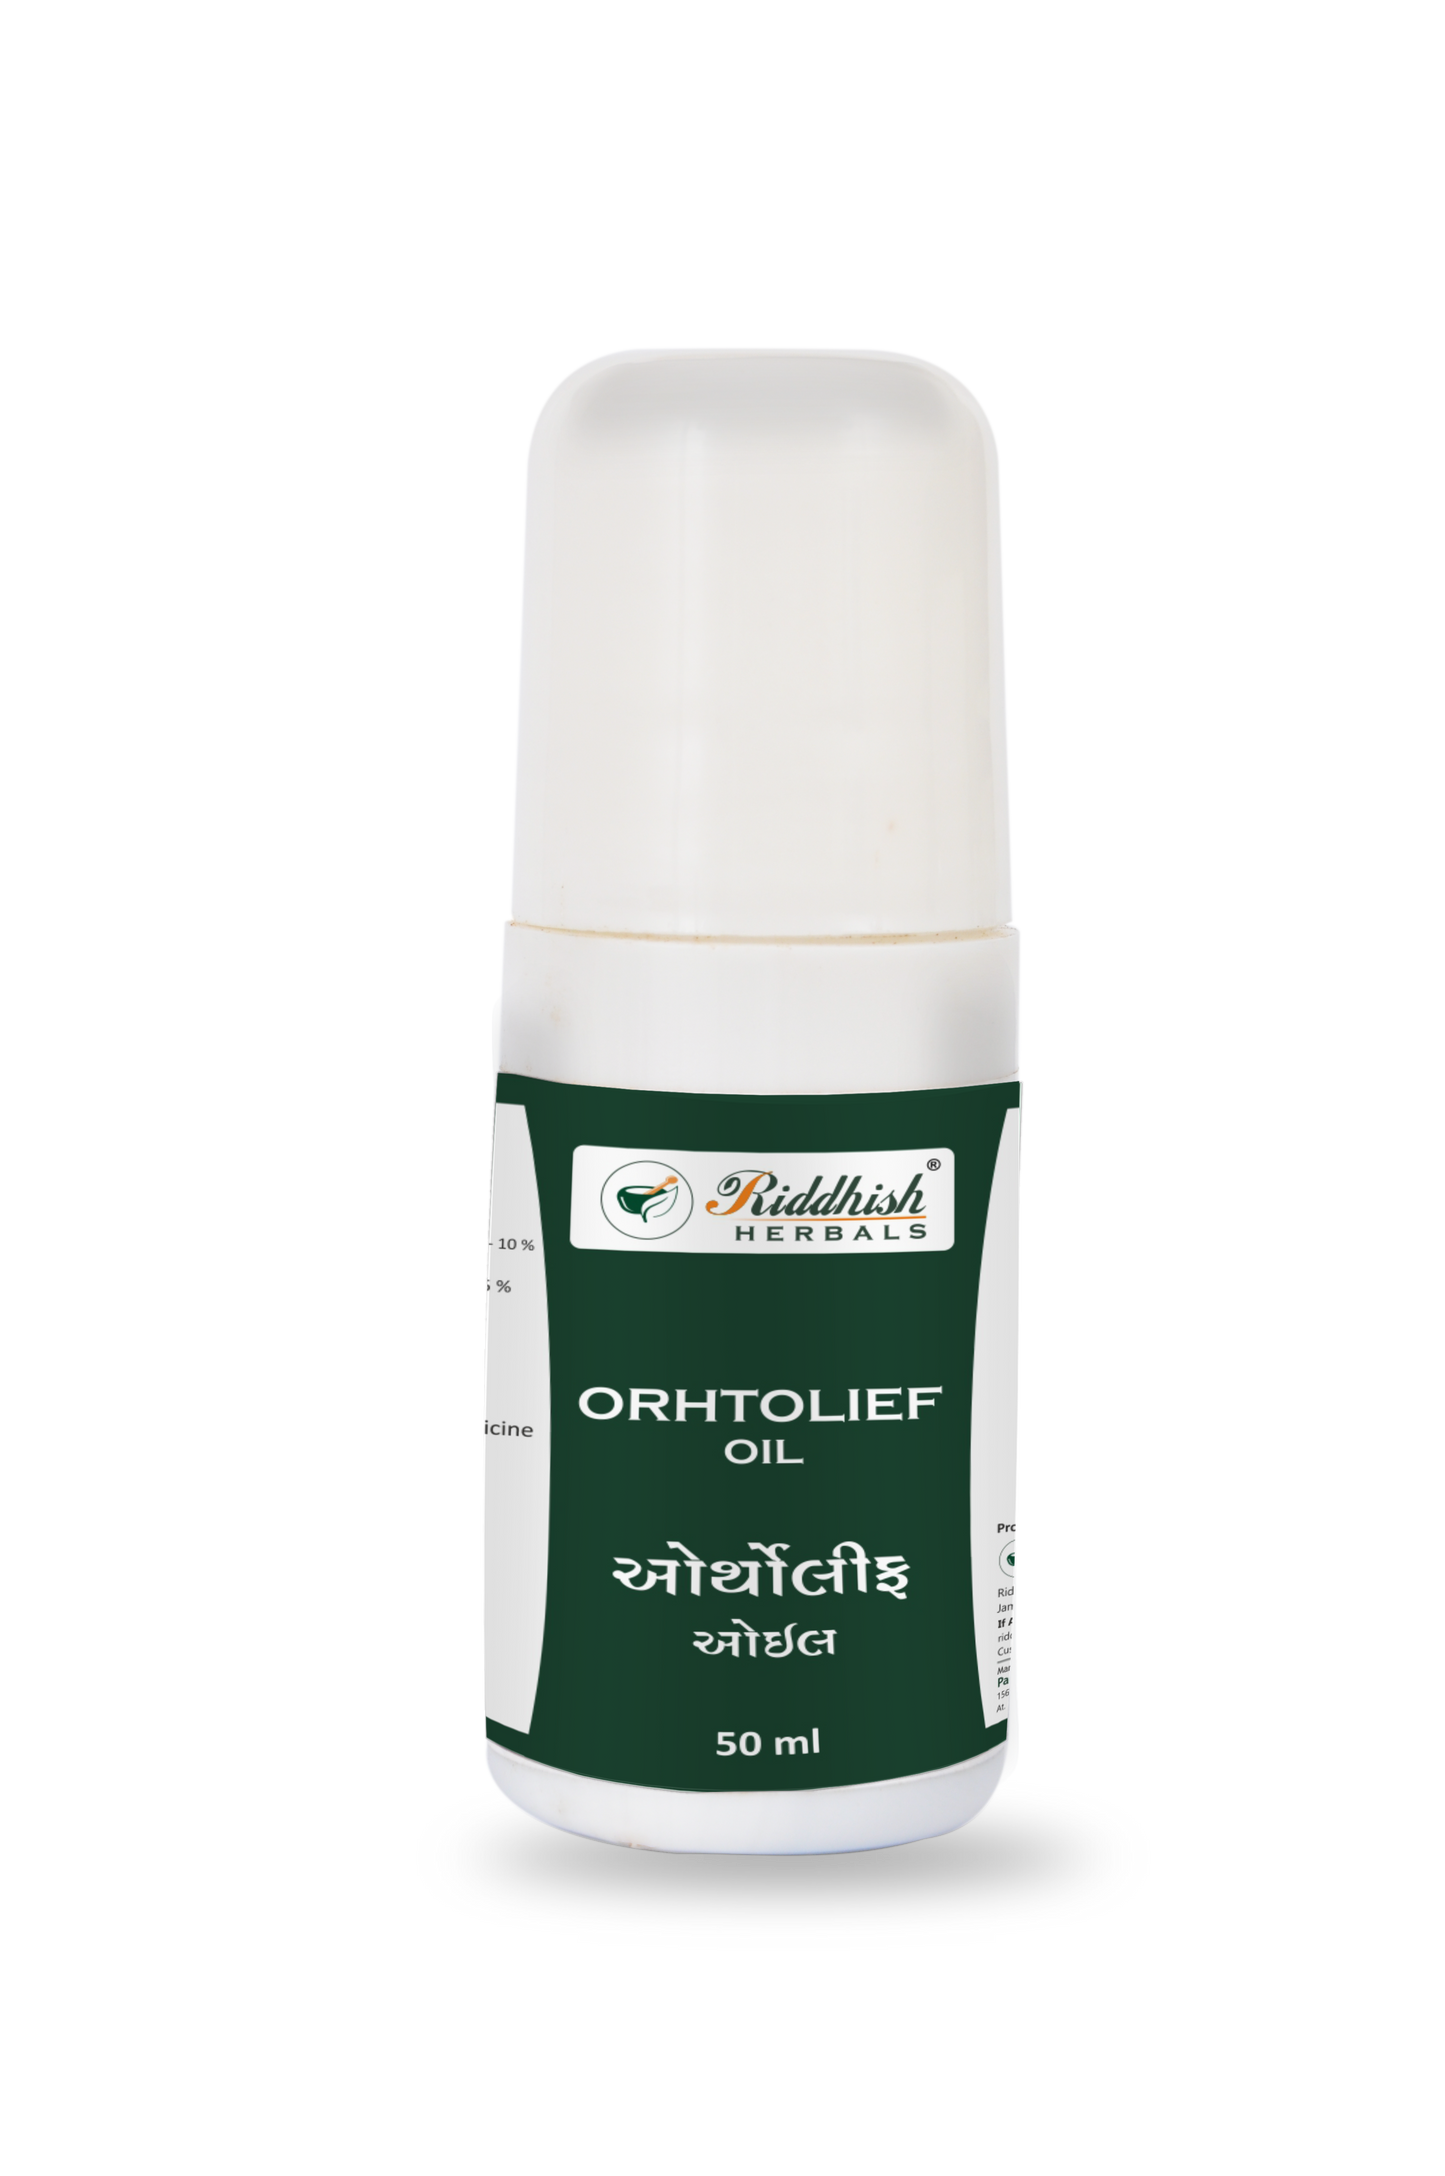 Ortholief oil | Useful in pain relieve 100ml